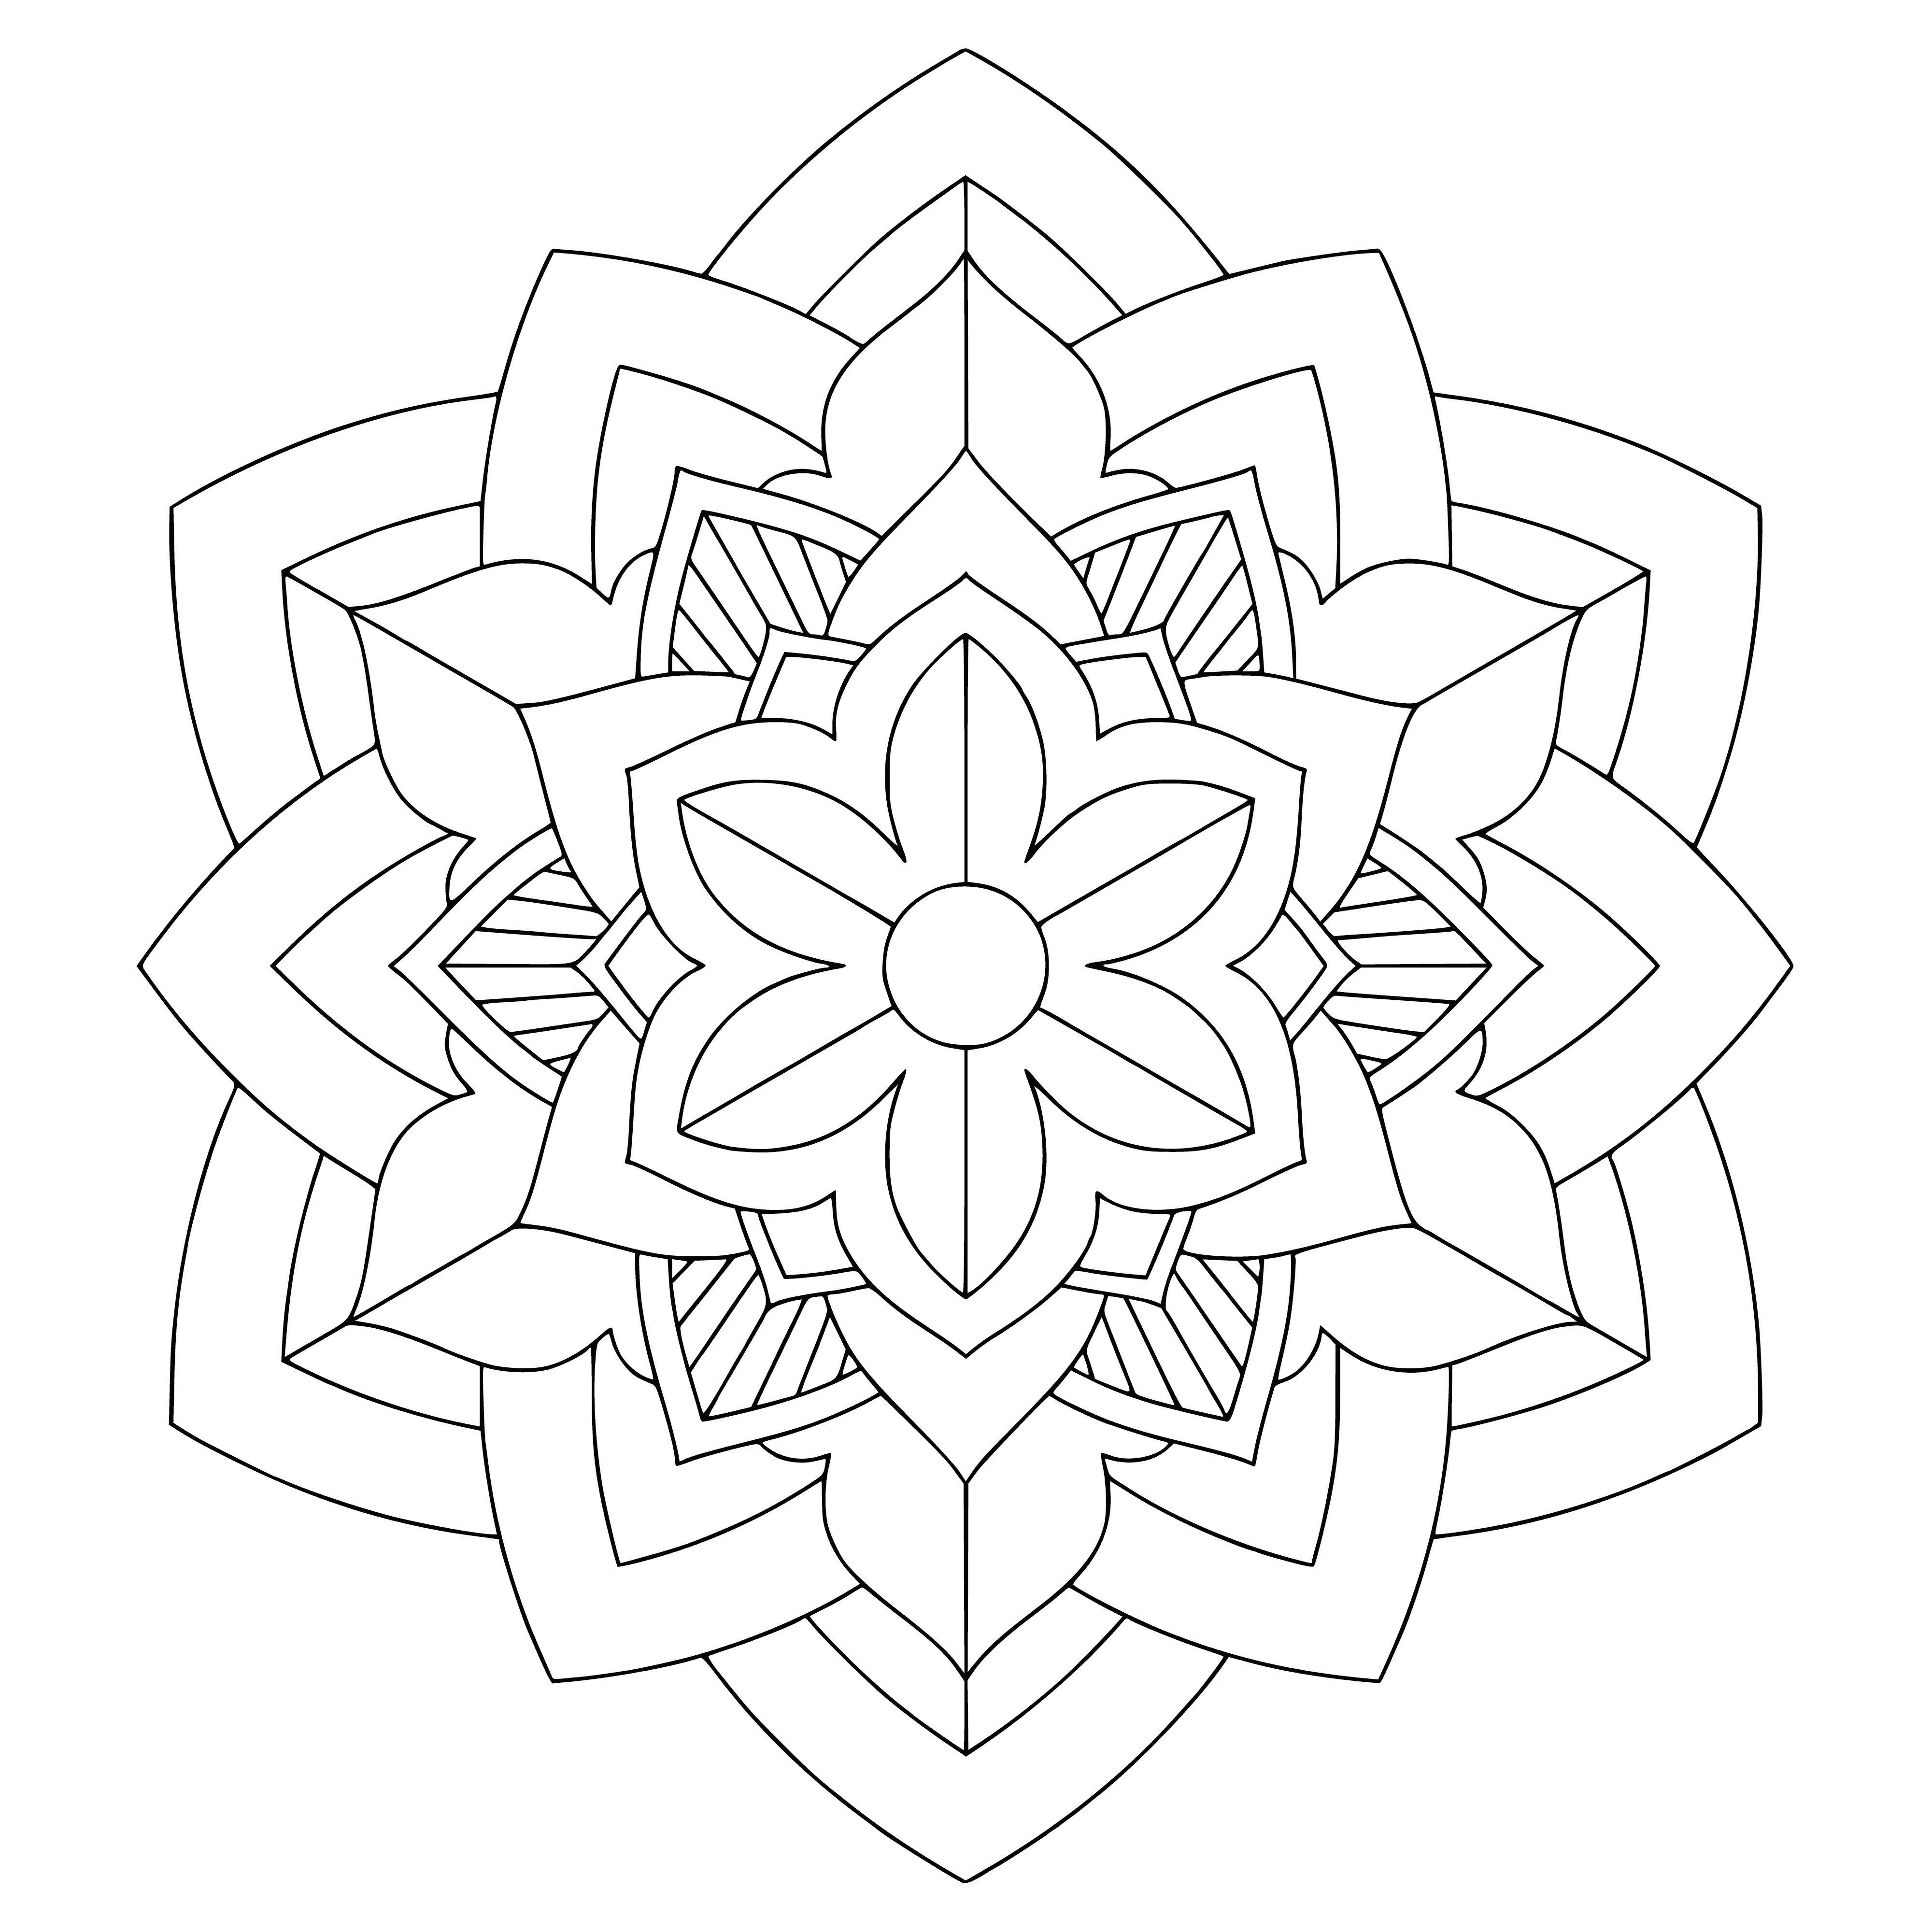 coloring page: Coloring flower mandalas can be used to focus your mind while meditating or to create your own individualized mandala. #MandalaColoring